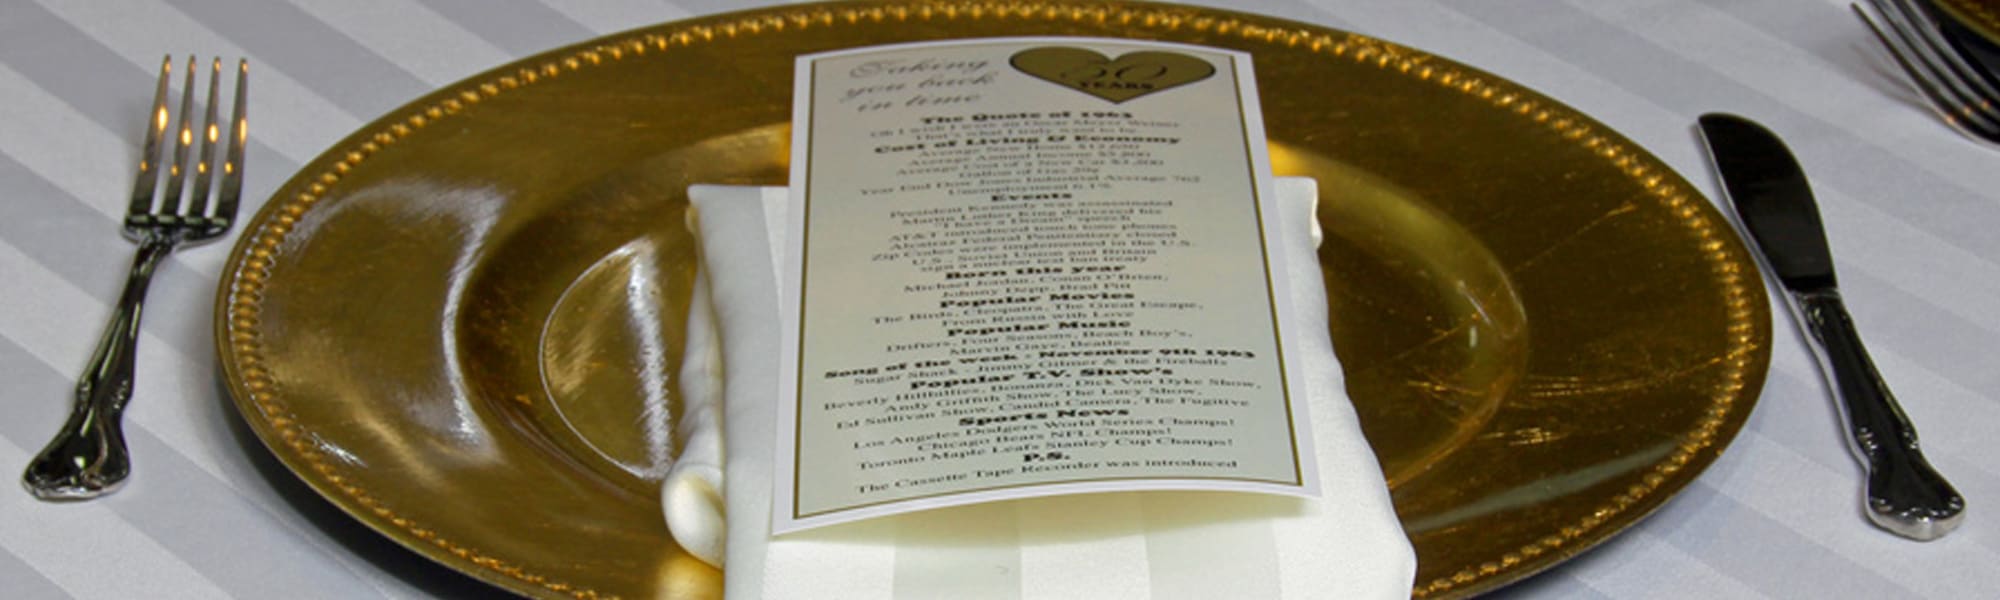 Catering Services Terms and Conditions